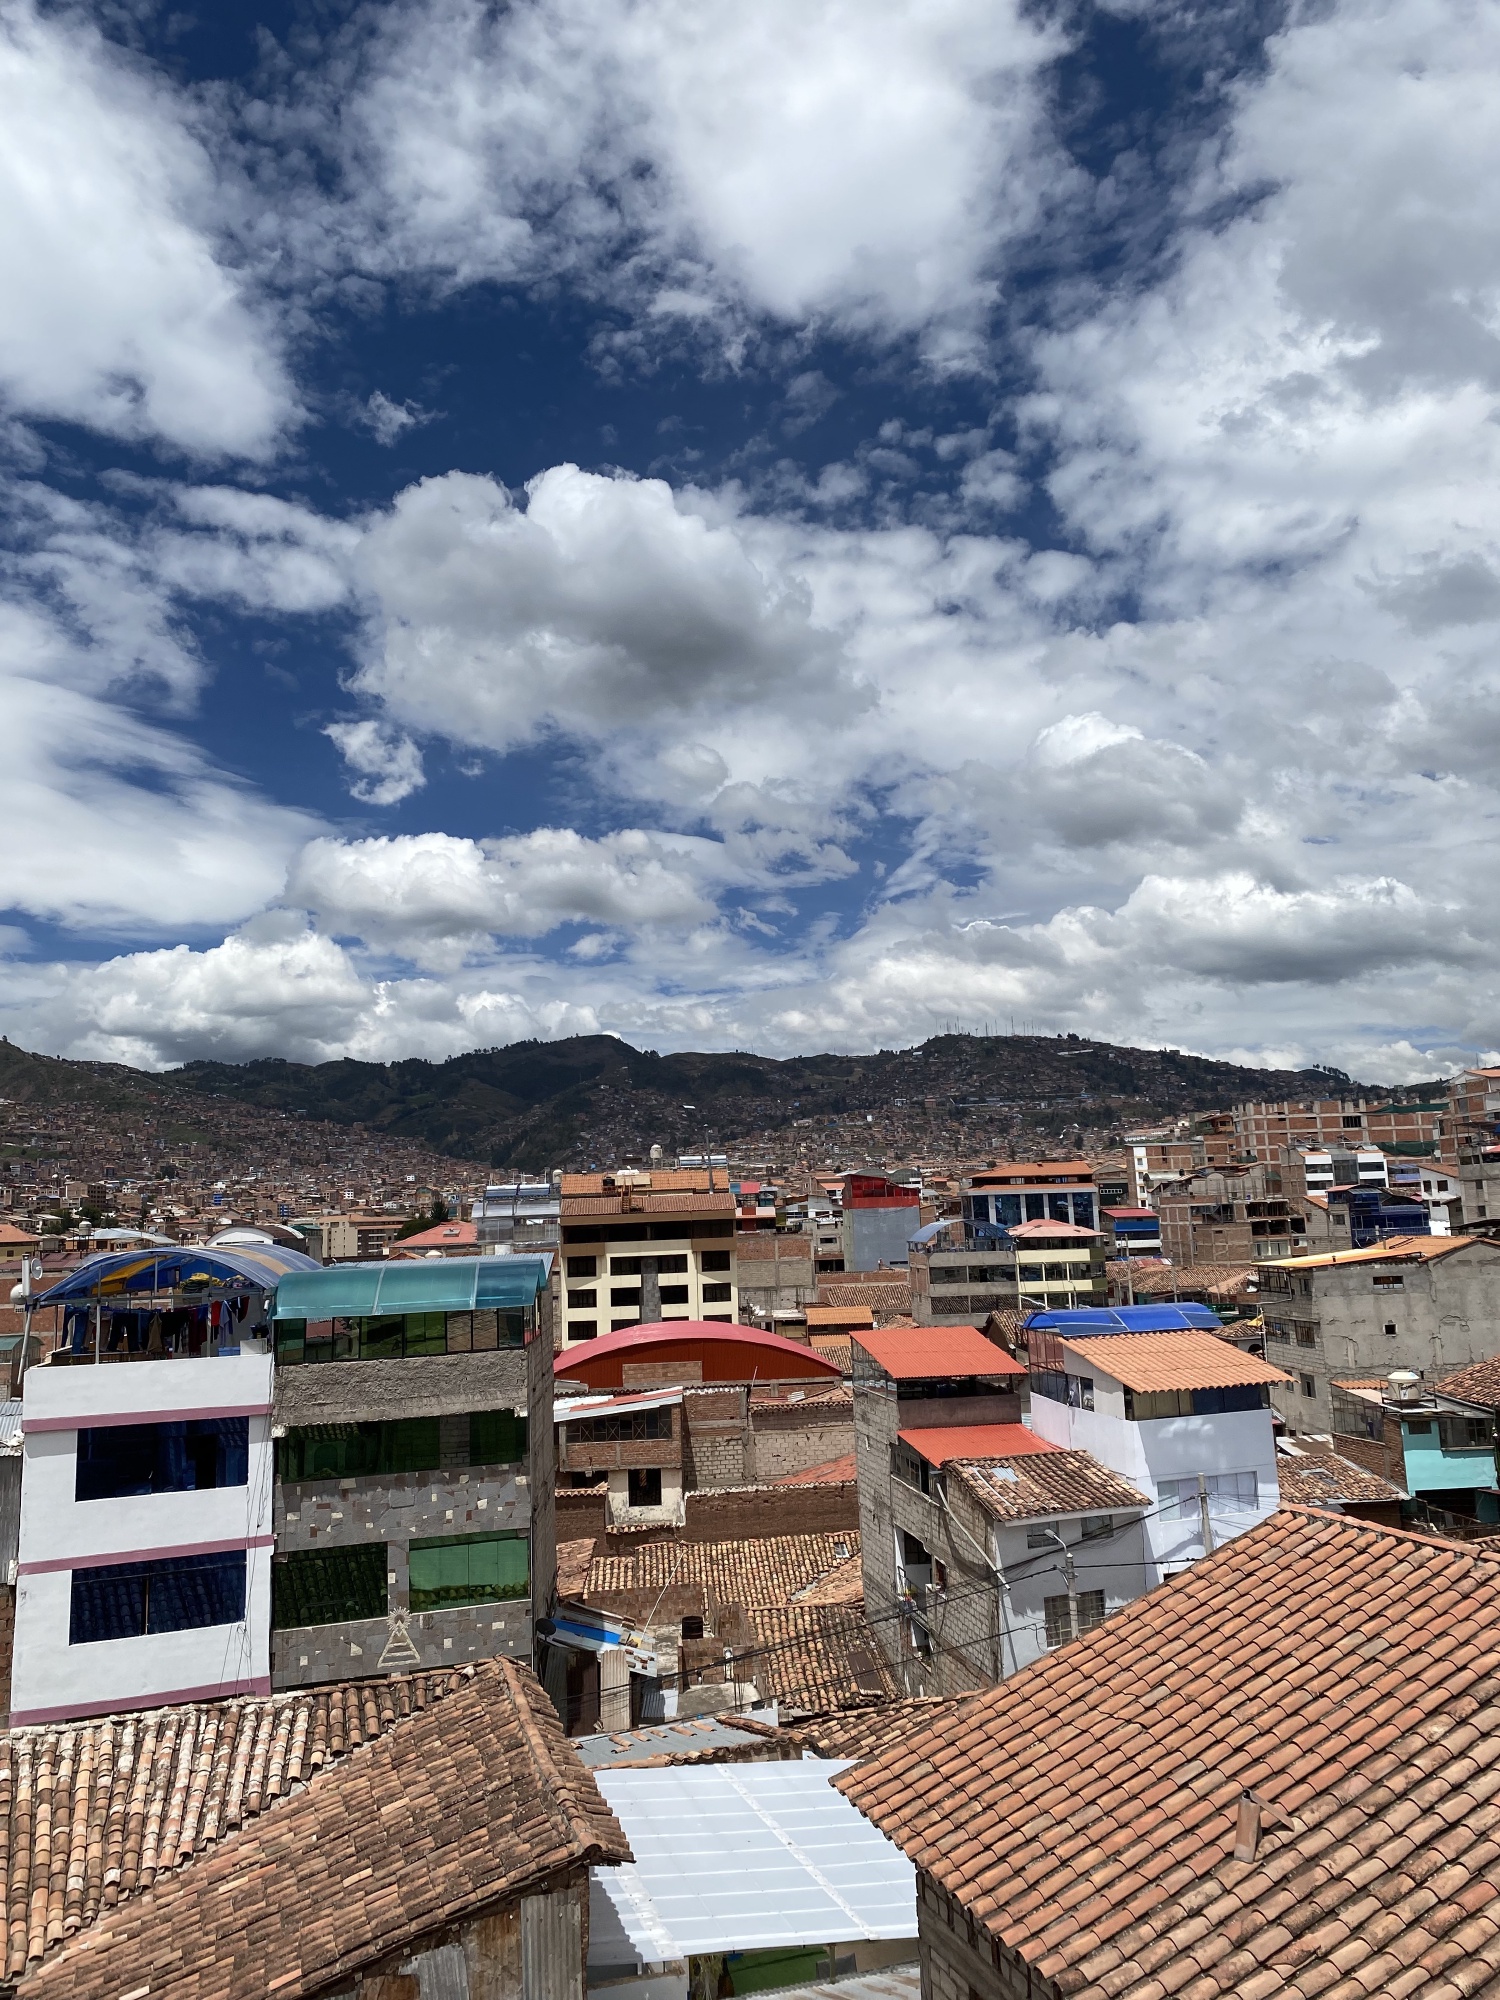 Morning view. As per our research, you have to acclimate yourself to the high elevation of Cusco for a few days so you can breathe better, especially if you're hiking Machu Picchu!